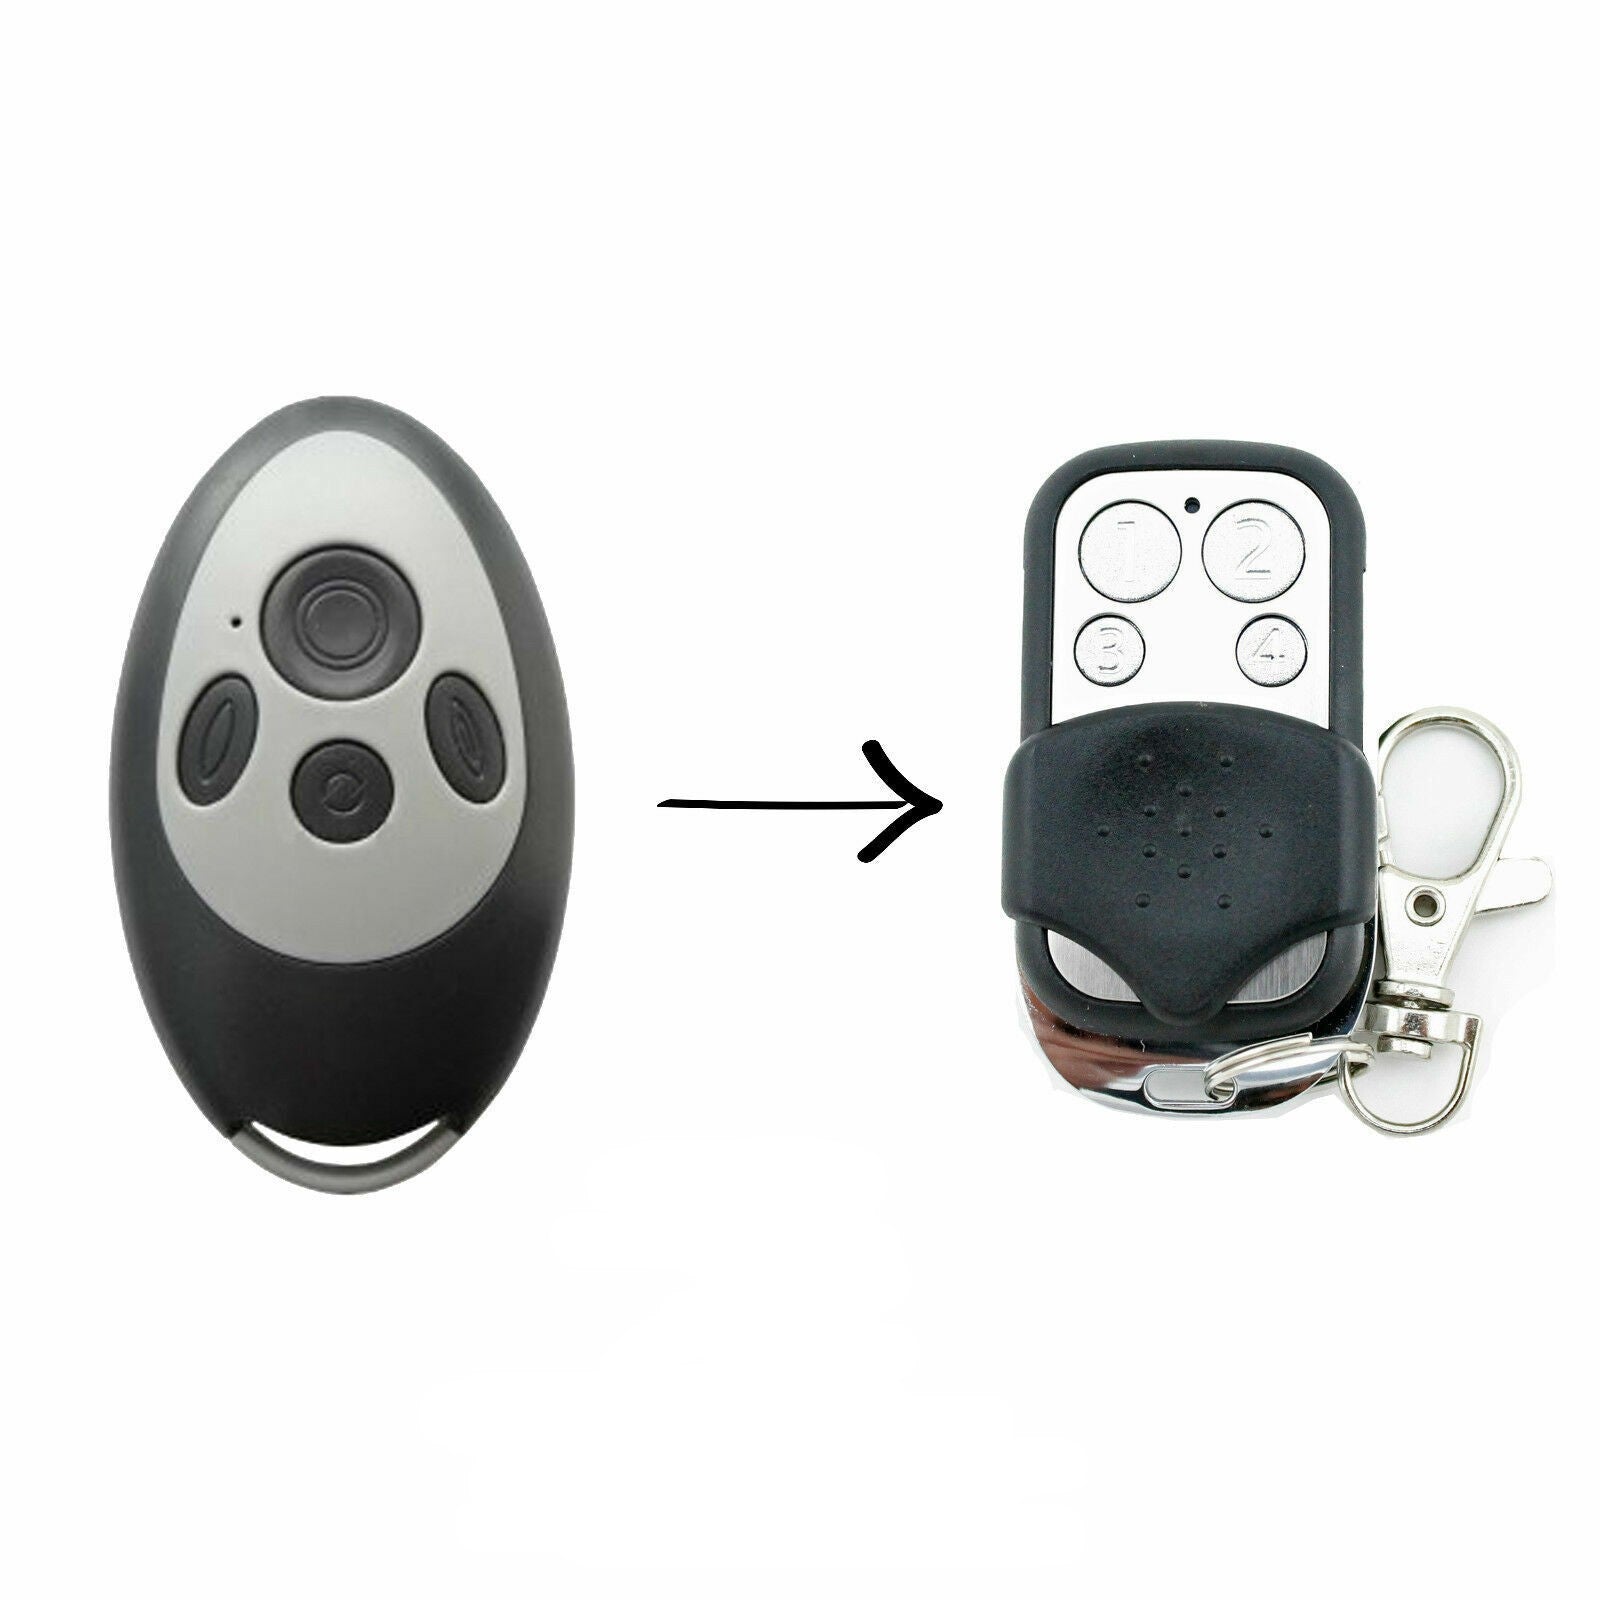 Replacement to suit Gryphon Stealth TM60 Garage/Gate Remote SKR433-1 SKRJ433 - Office Catch